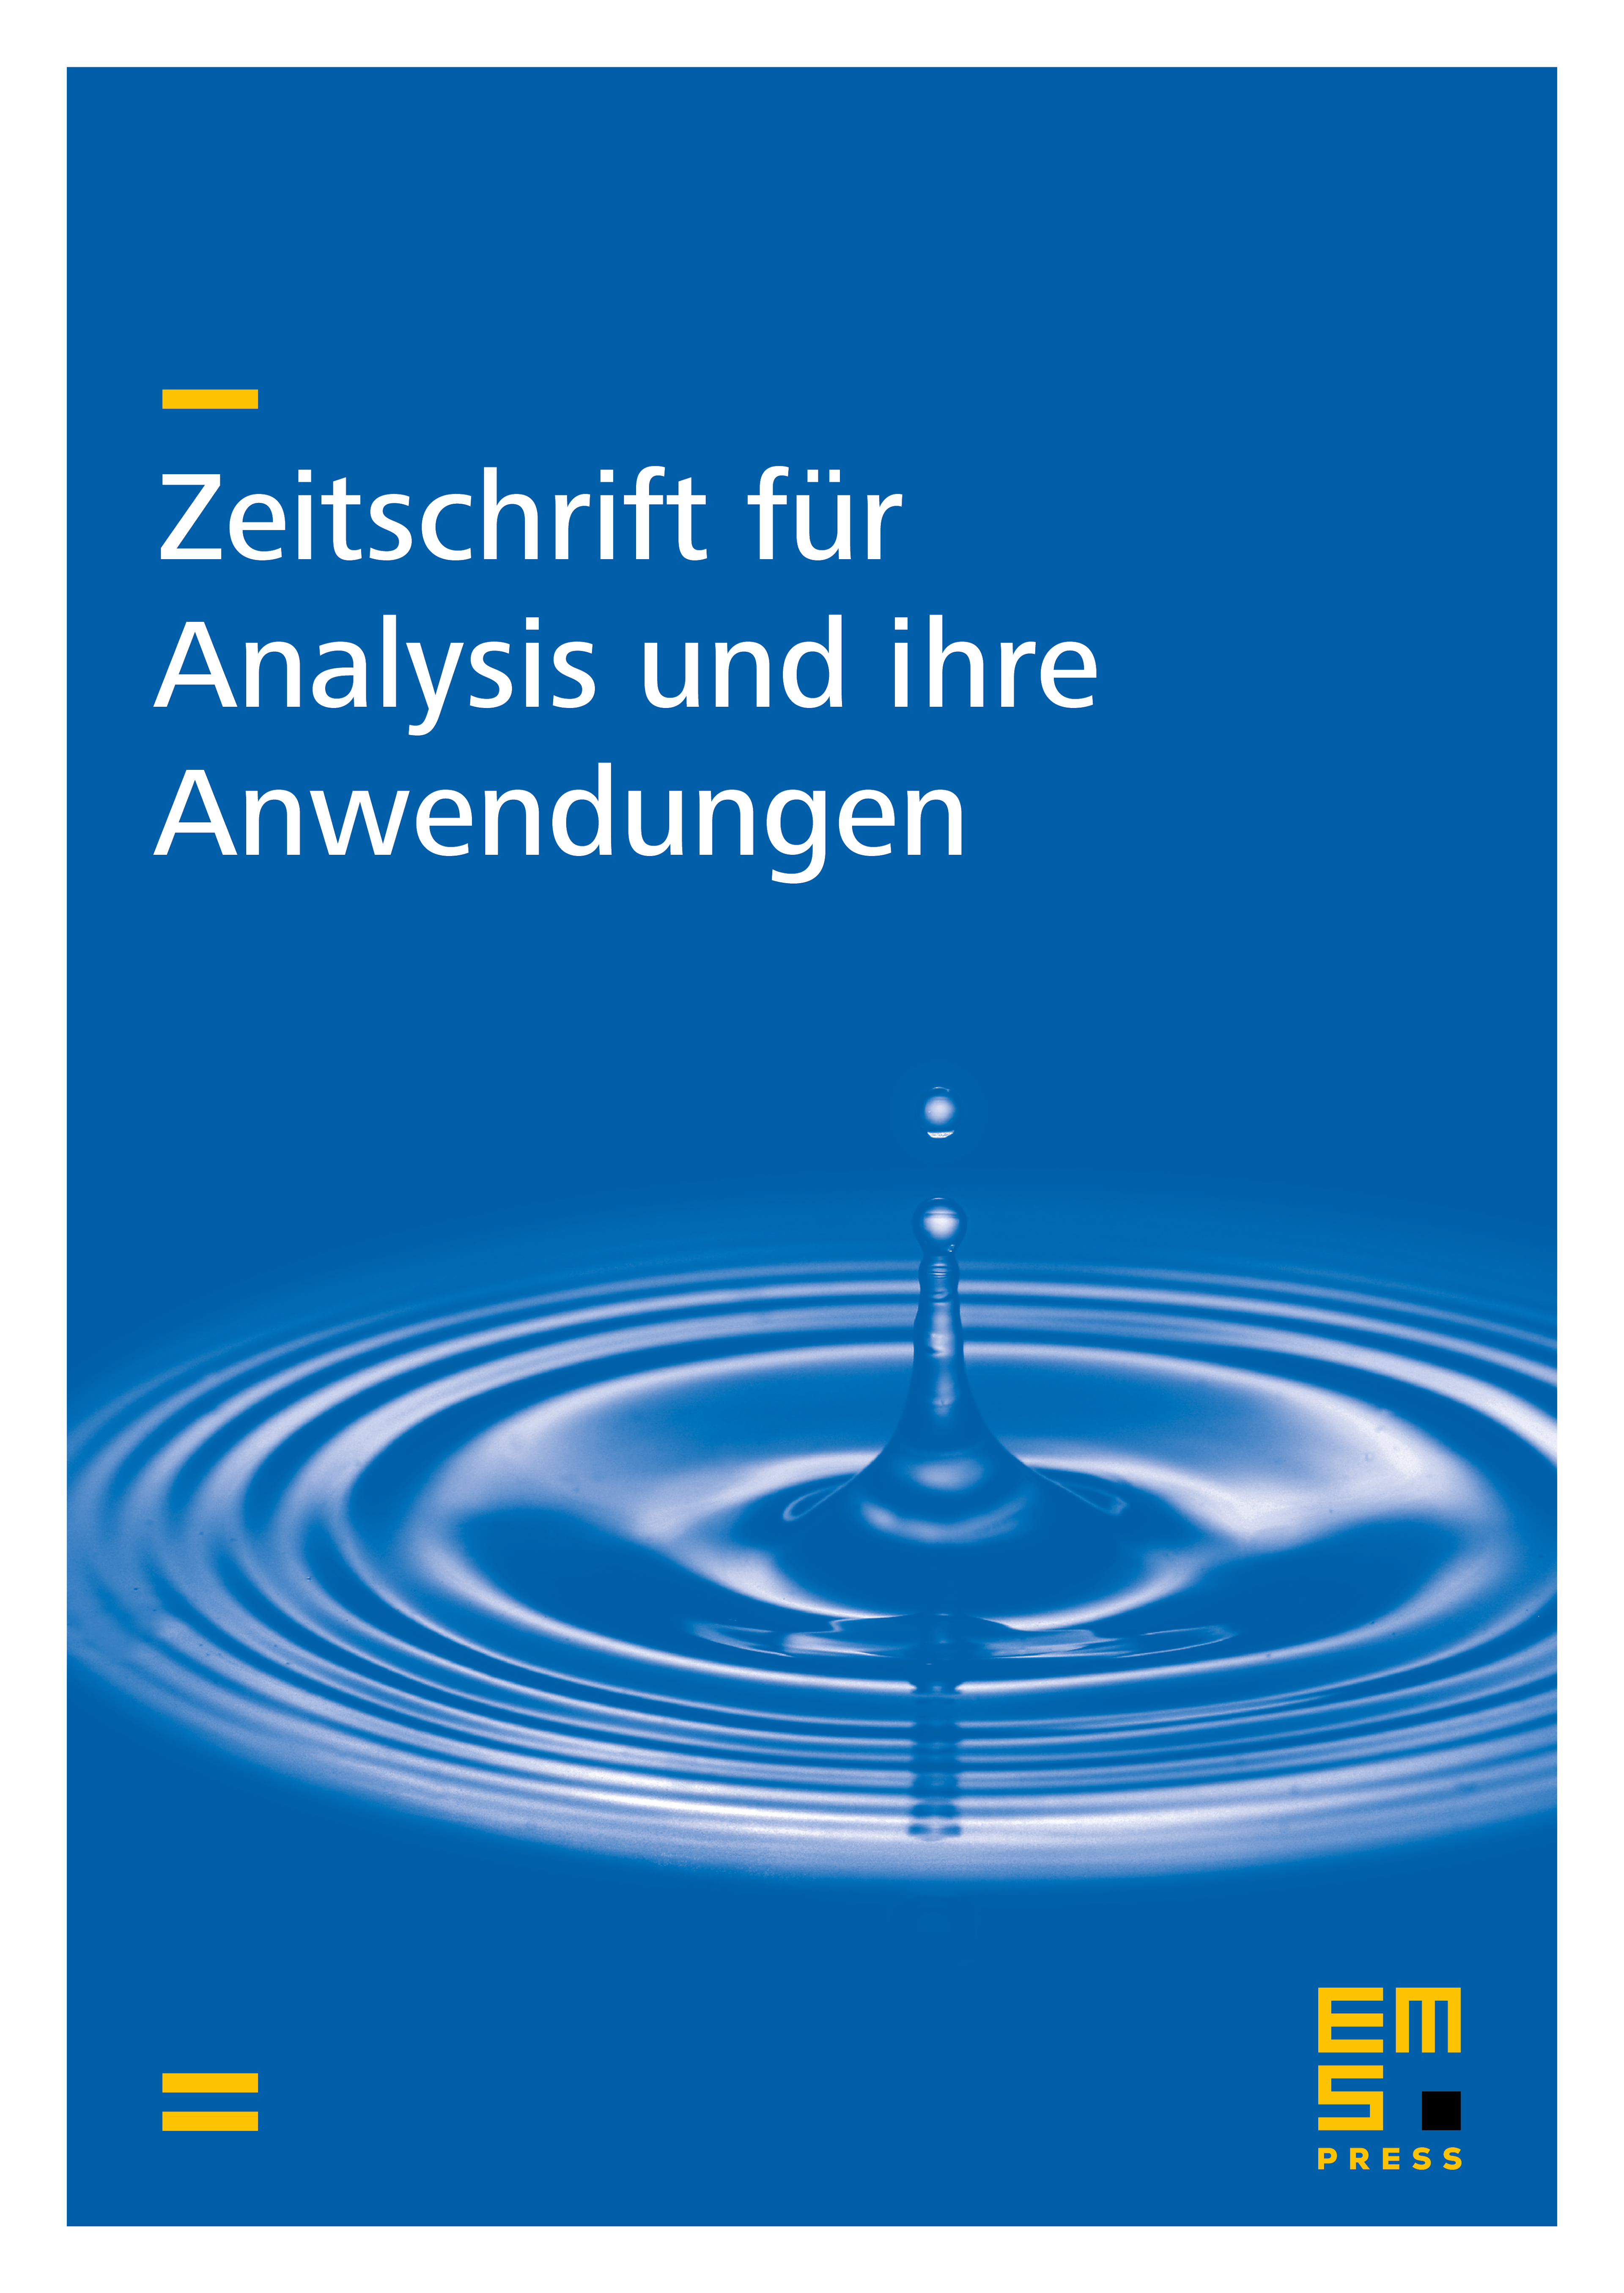 On Ren-Kähler's Paper “Hardy-Littlewood Inequalities and $Q_p$-Spaces” Z. Anal. Anwendungen 24 (2005), 375 – 388 cover